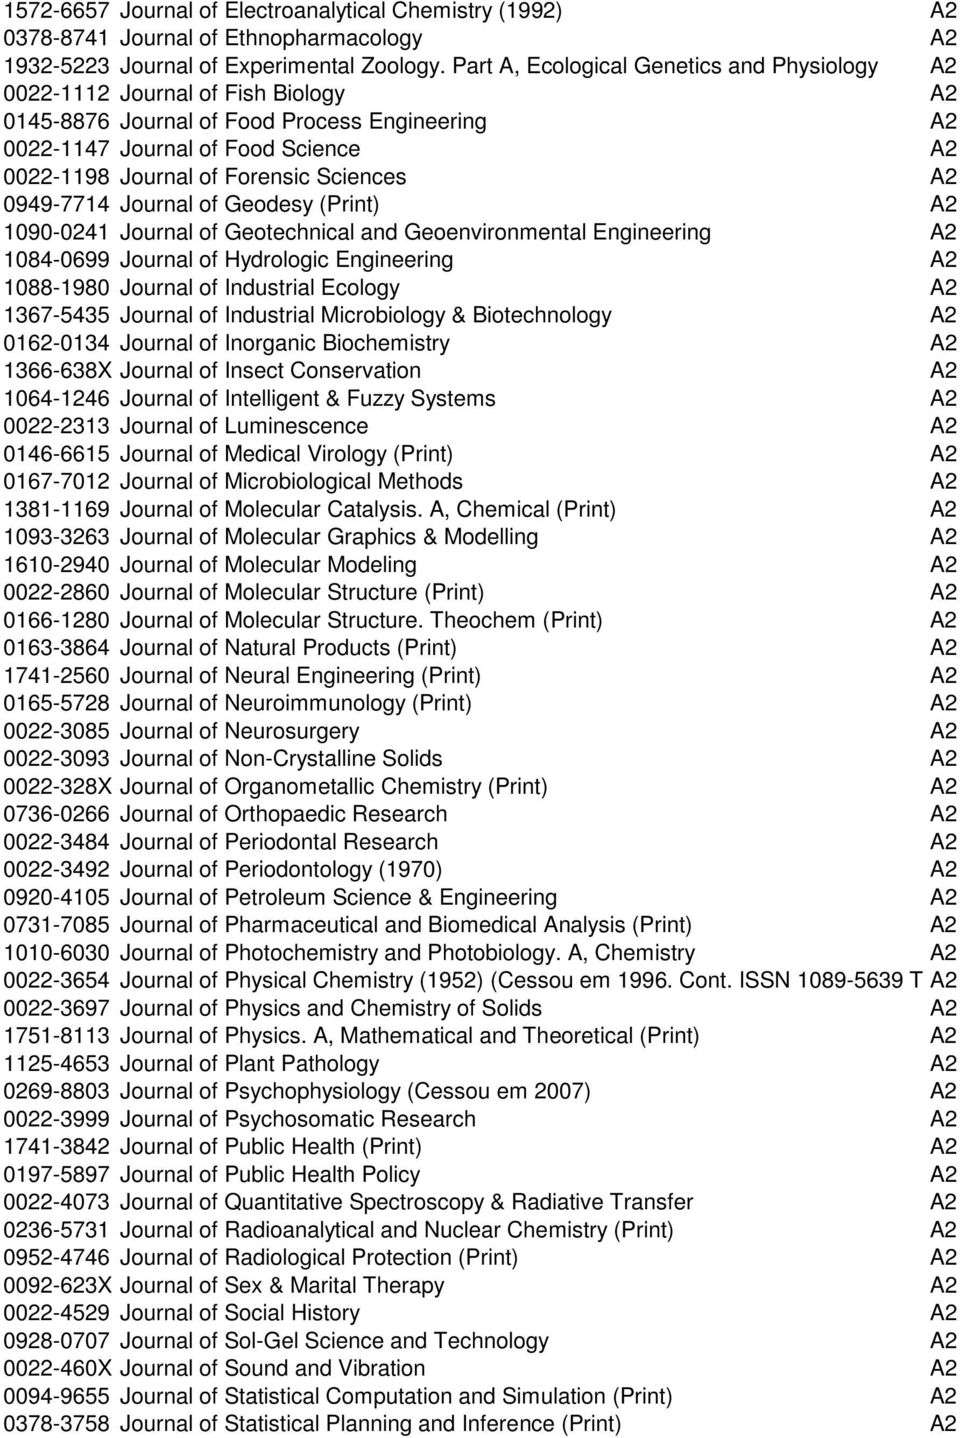 Sciences A2 0949-7714 Journal of Geodesy (Print) A2 1090-0241 Journal of Geotechnical and Geoenvironmental Engineering A2 1084-0699 Journal of Hydrologic Engineering A2 1088-1980 Journal of